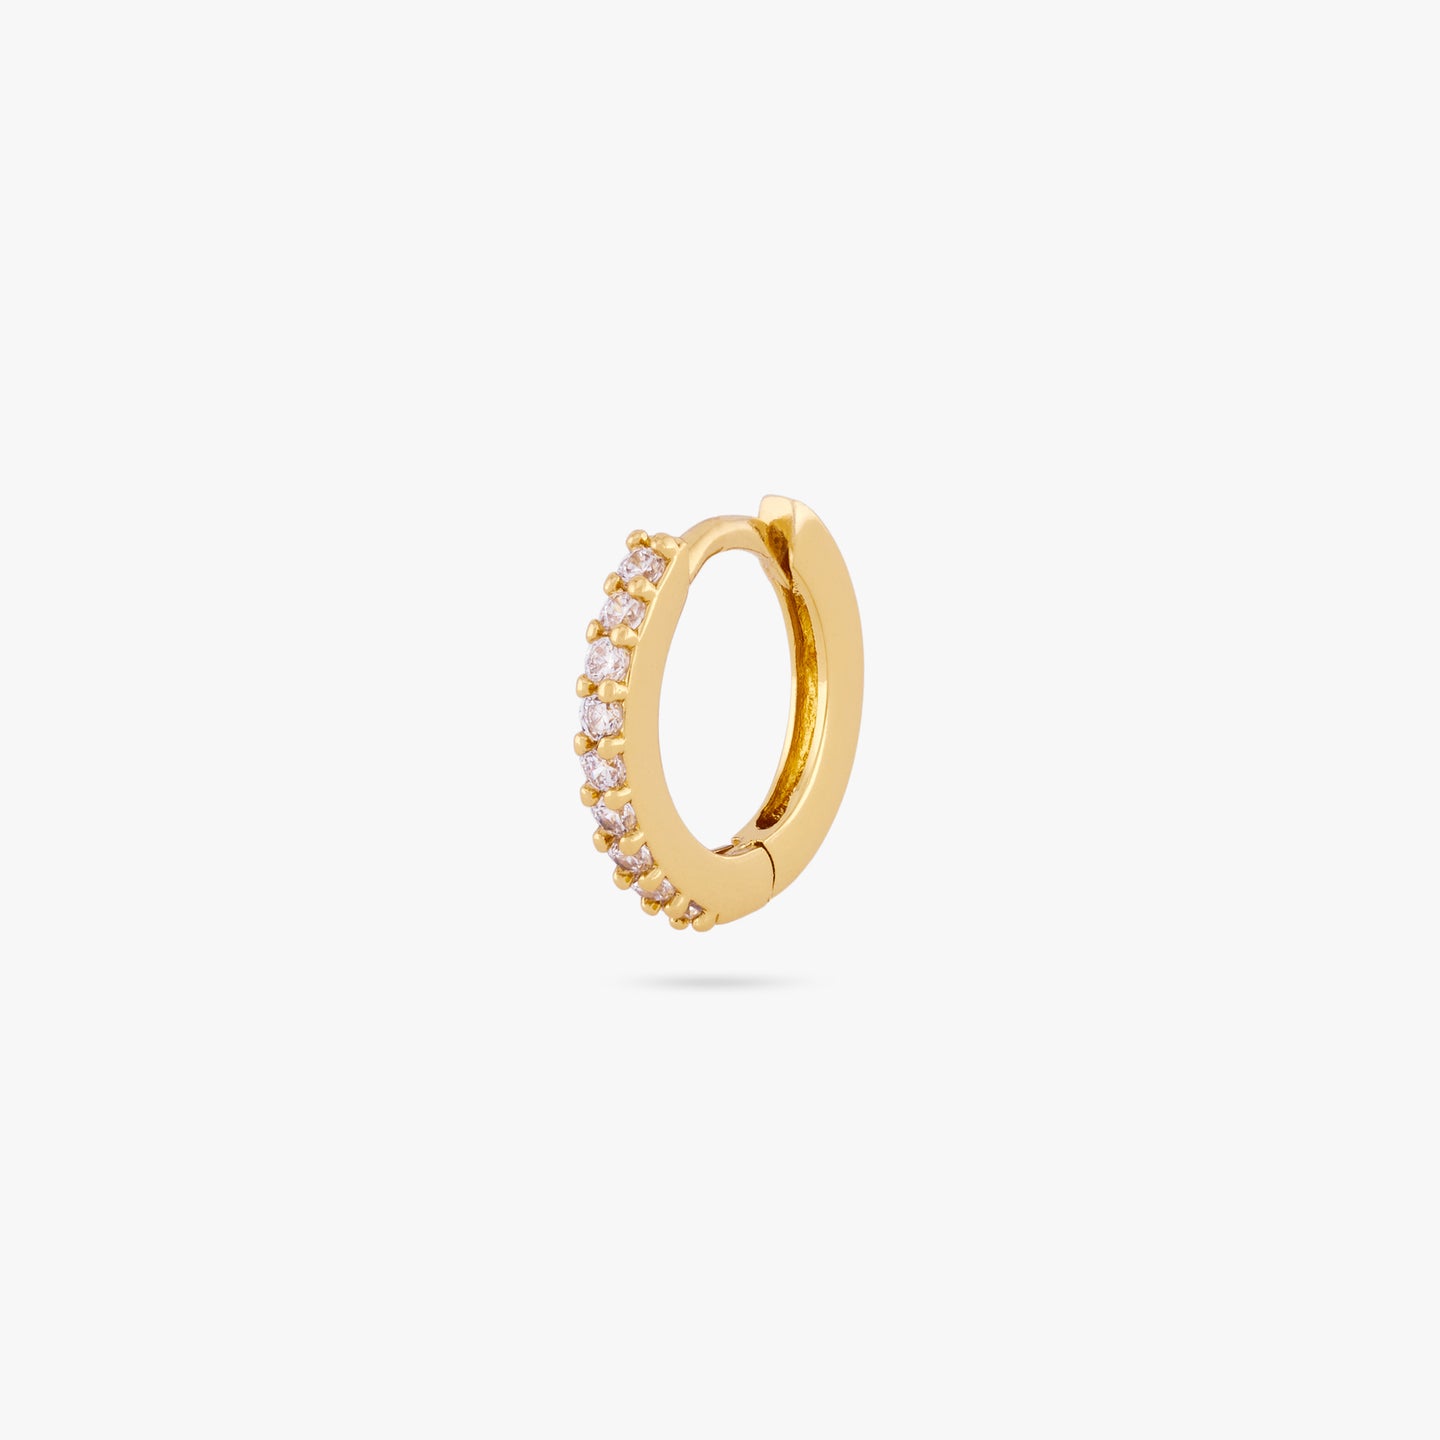 A mini gold huggie lined with clear cz gems on the front color:null|gold/clear